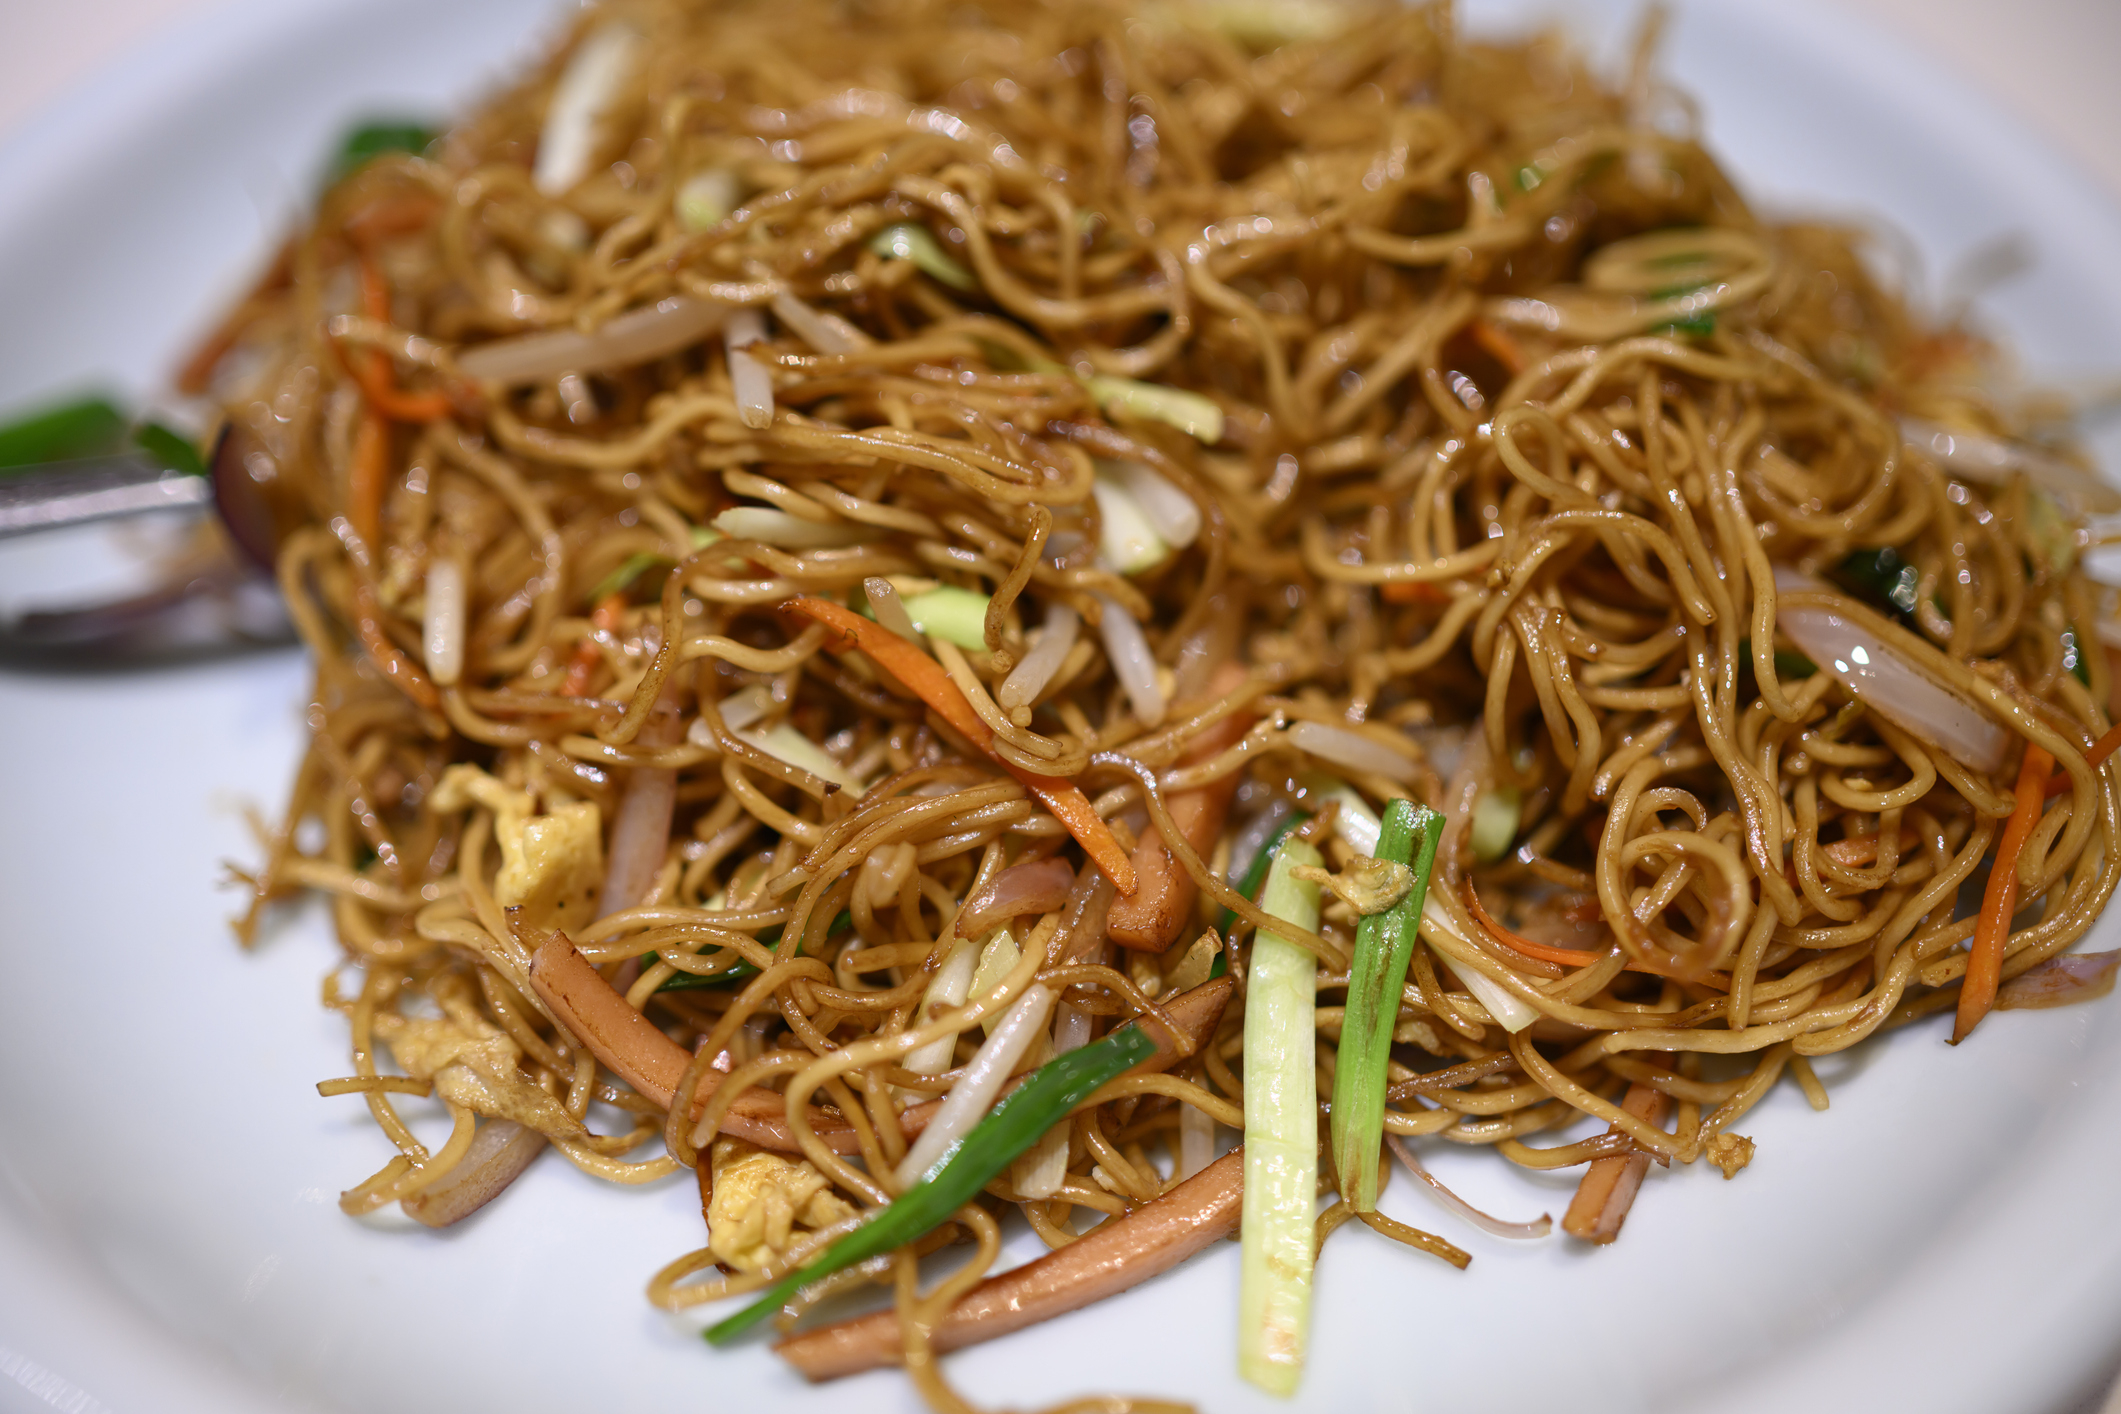 Plate of stir-fried noodles with vegetables and egg